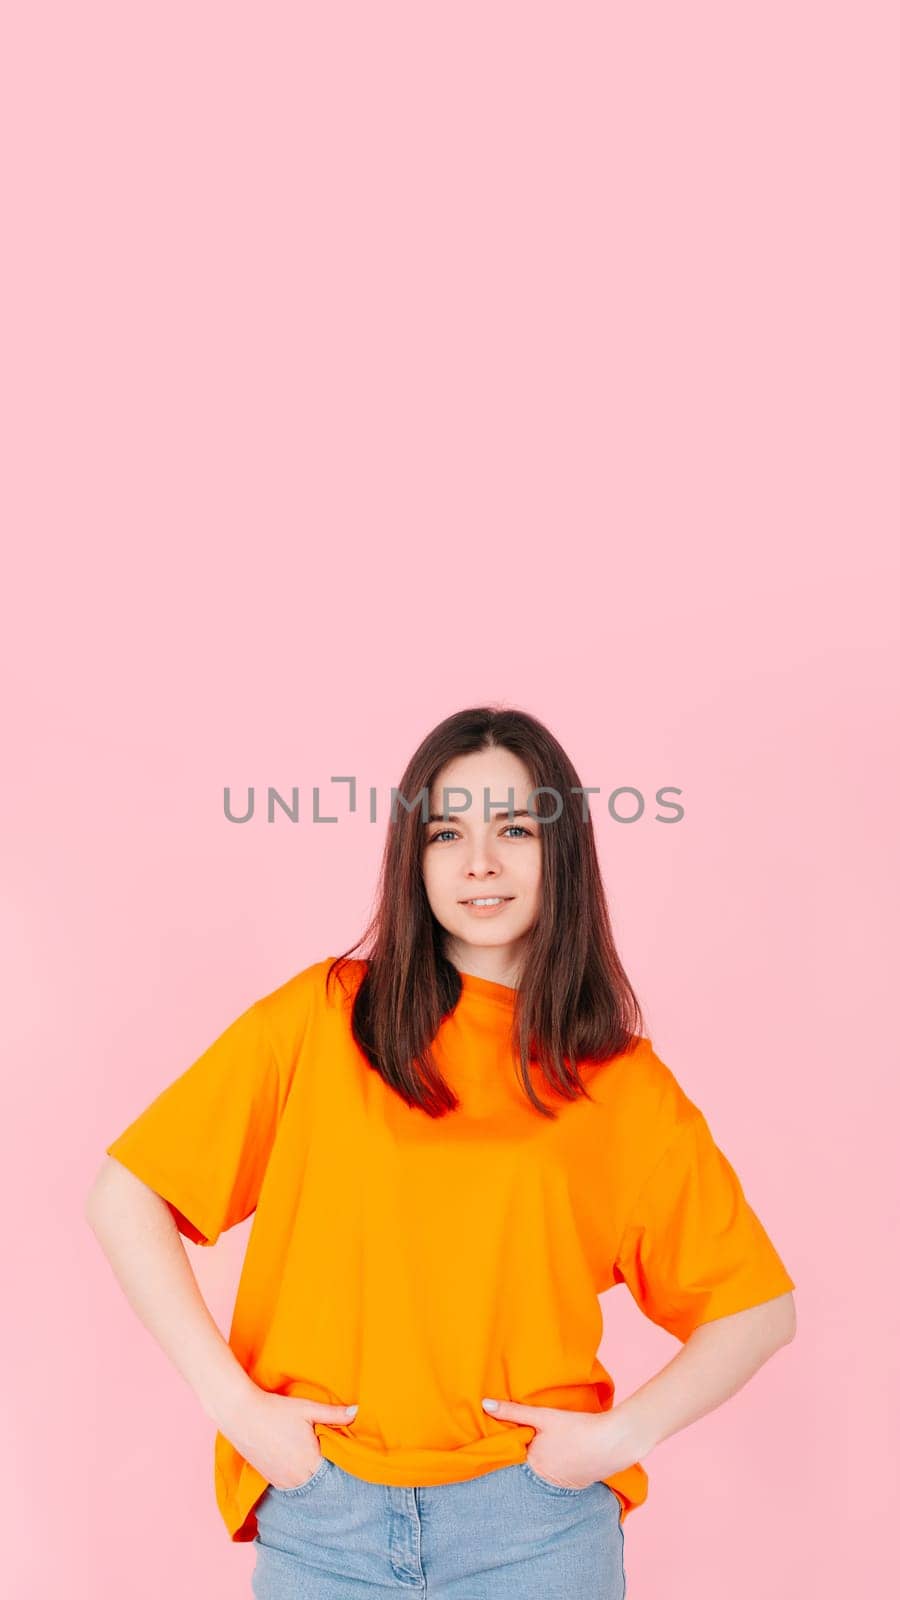 Joyful and Charming Young Woman with a Radiant Smile, Hands in Pockets. Contentment and Happiness. Isolated on Pink Background. Perfect for Lifestyle, Happiness, and Positive Vibes Concept by ViShark